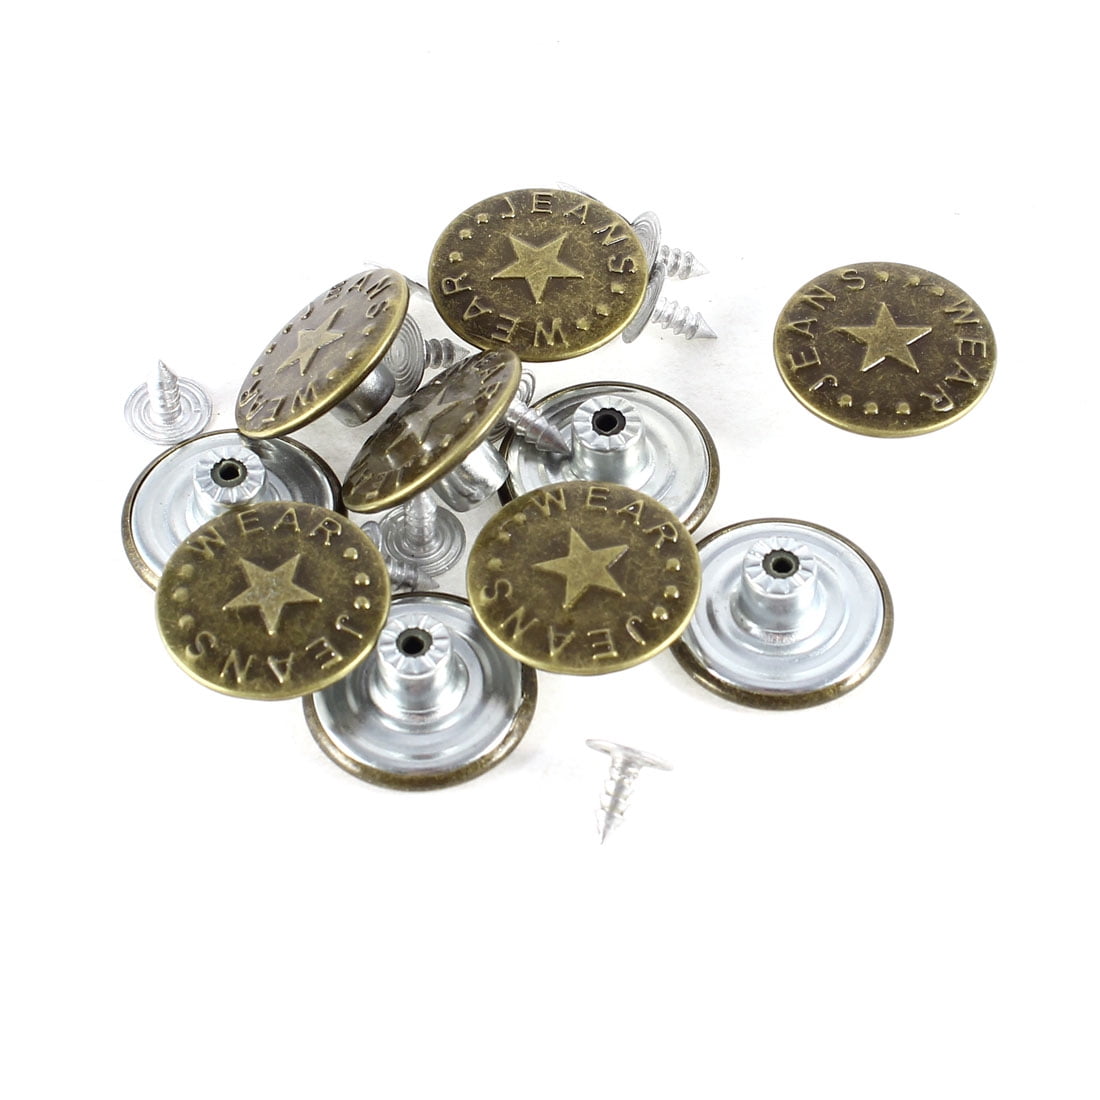 Dark Bronze,10pcs Clothing Repairing Jackets Trimming Shop 20mm Replacement Jeans Brass Button Fastener with Back Pin Studs for Denim